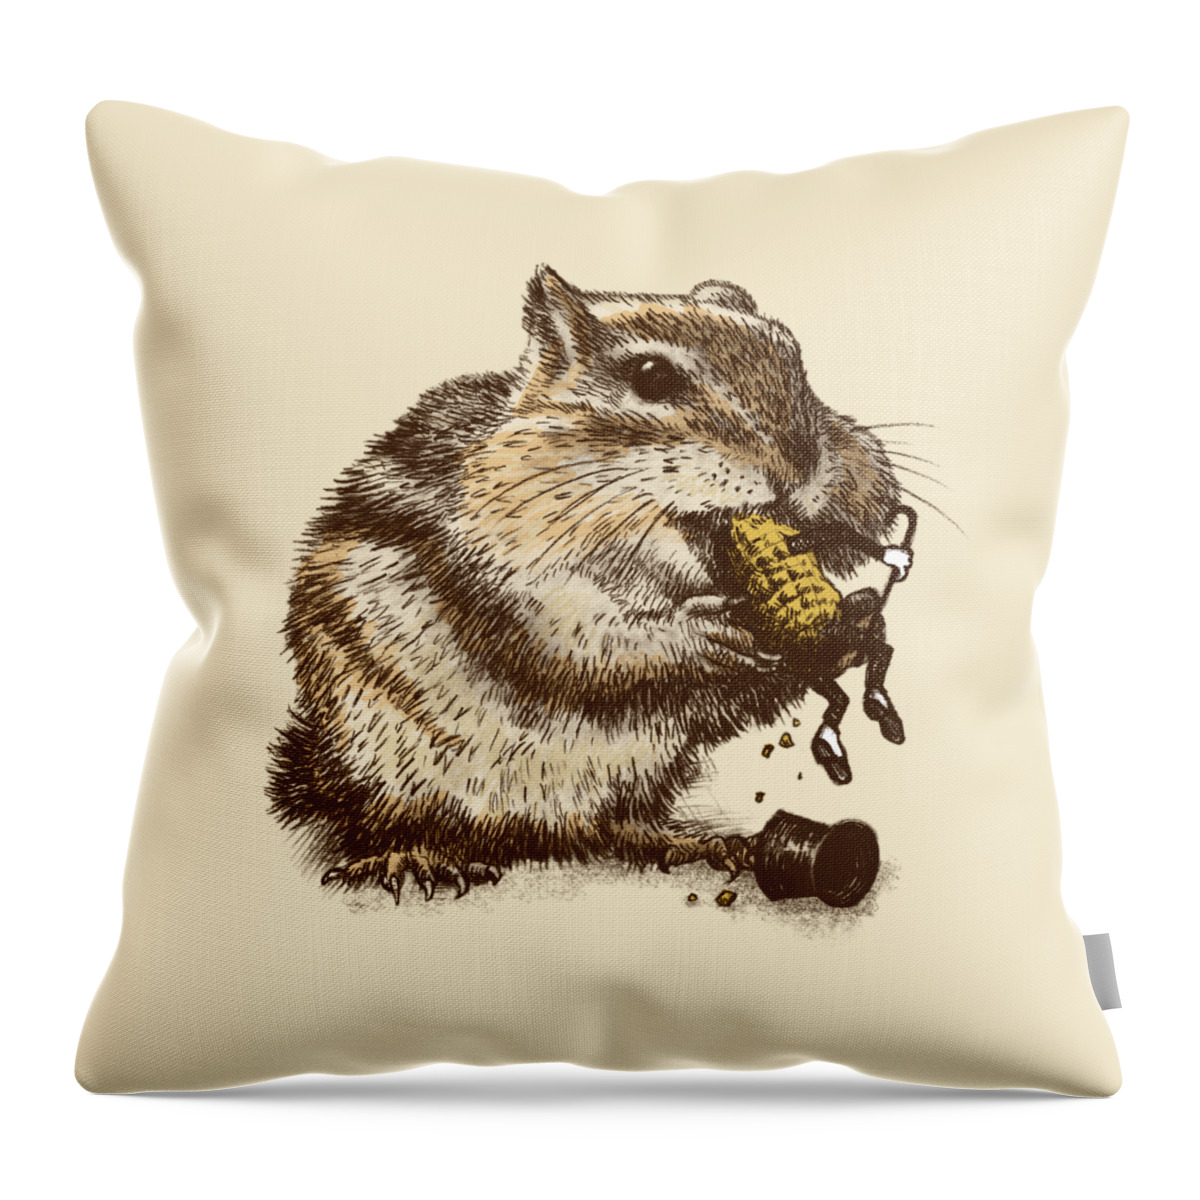 Chipmunk Throw Pillow featuring the drawing Occupational Hazard by Eric Fan